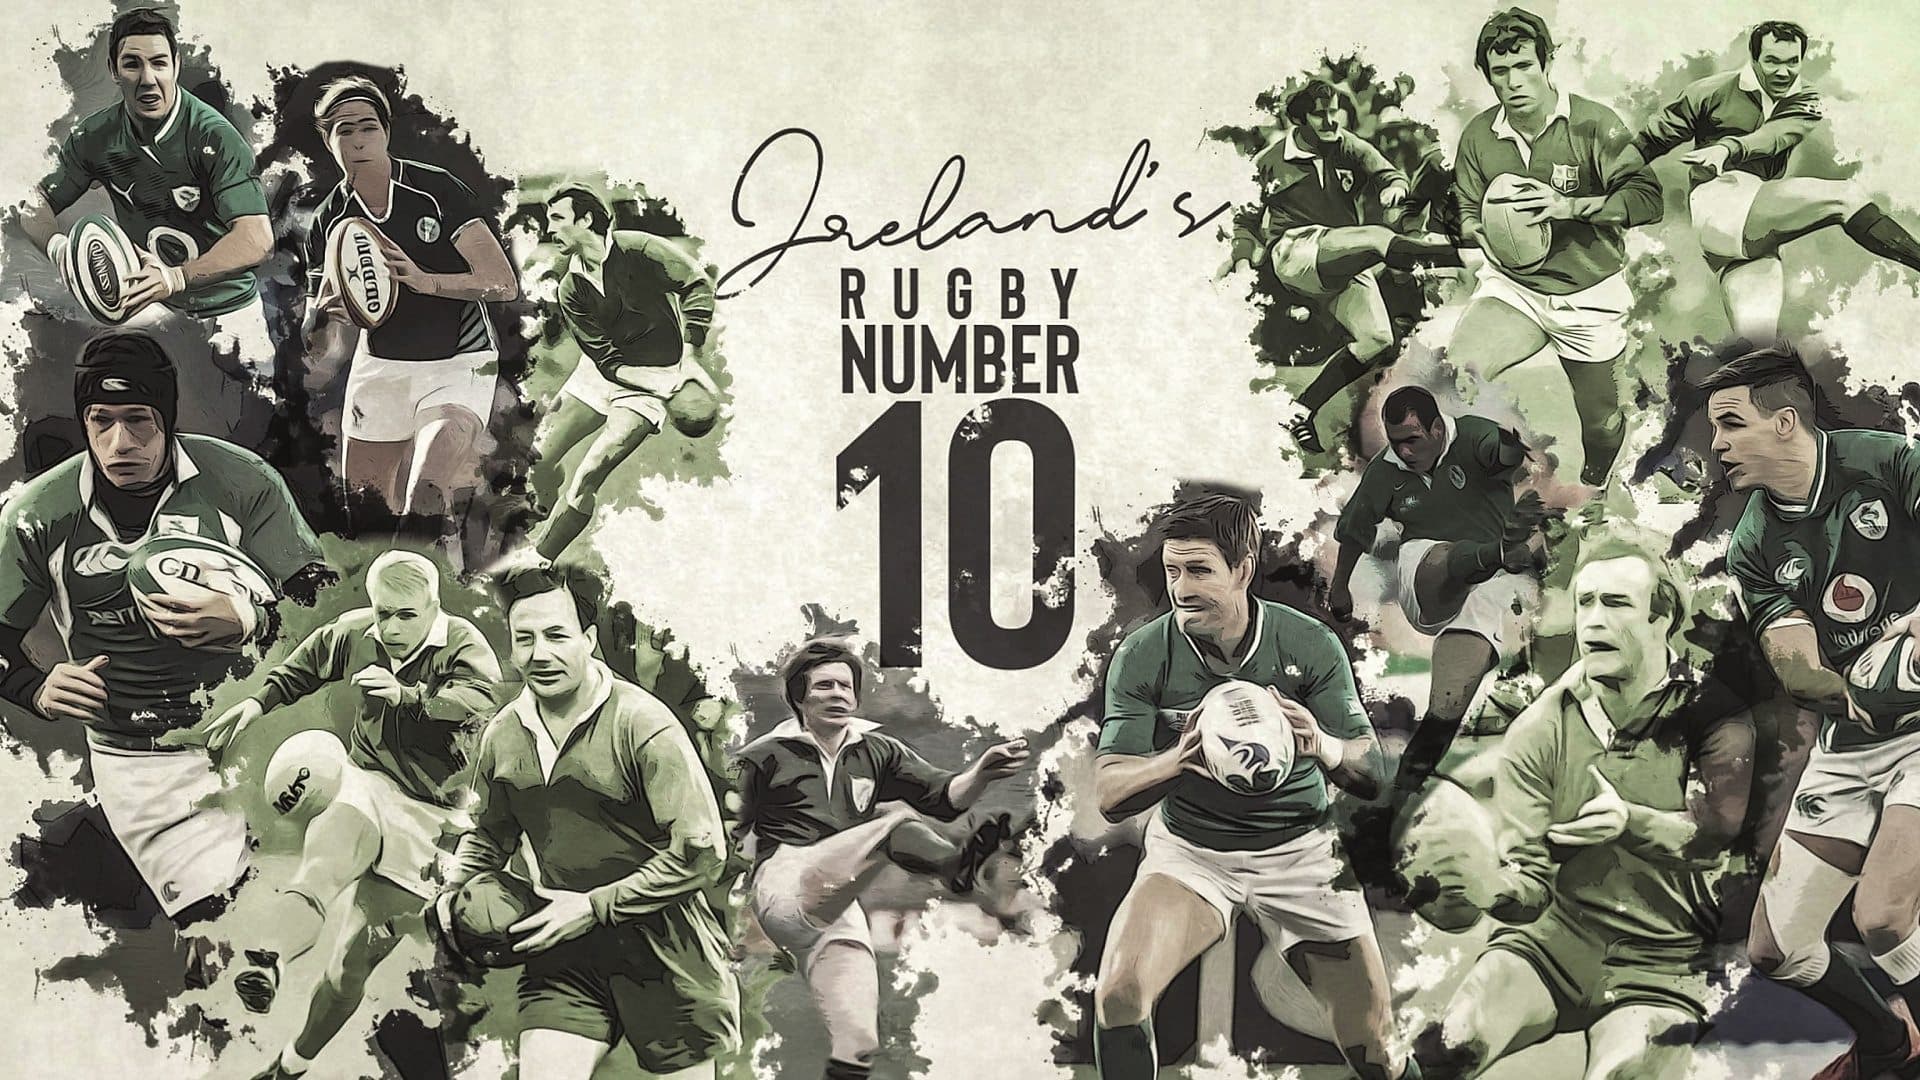 Ireland's Rugby Number 10